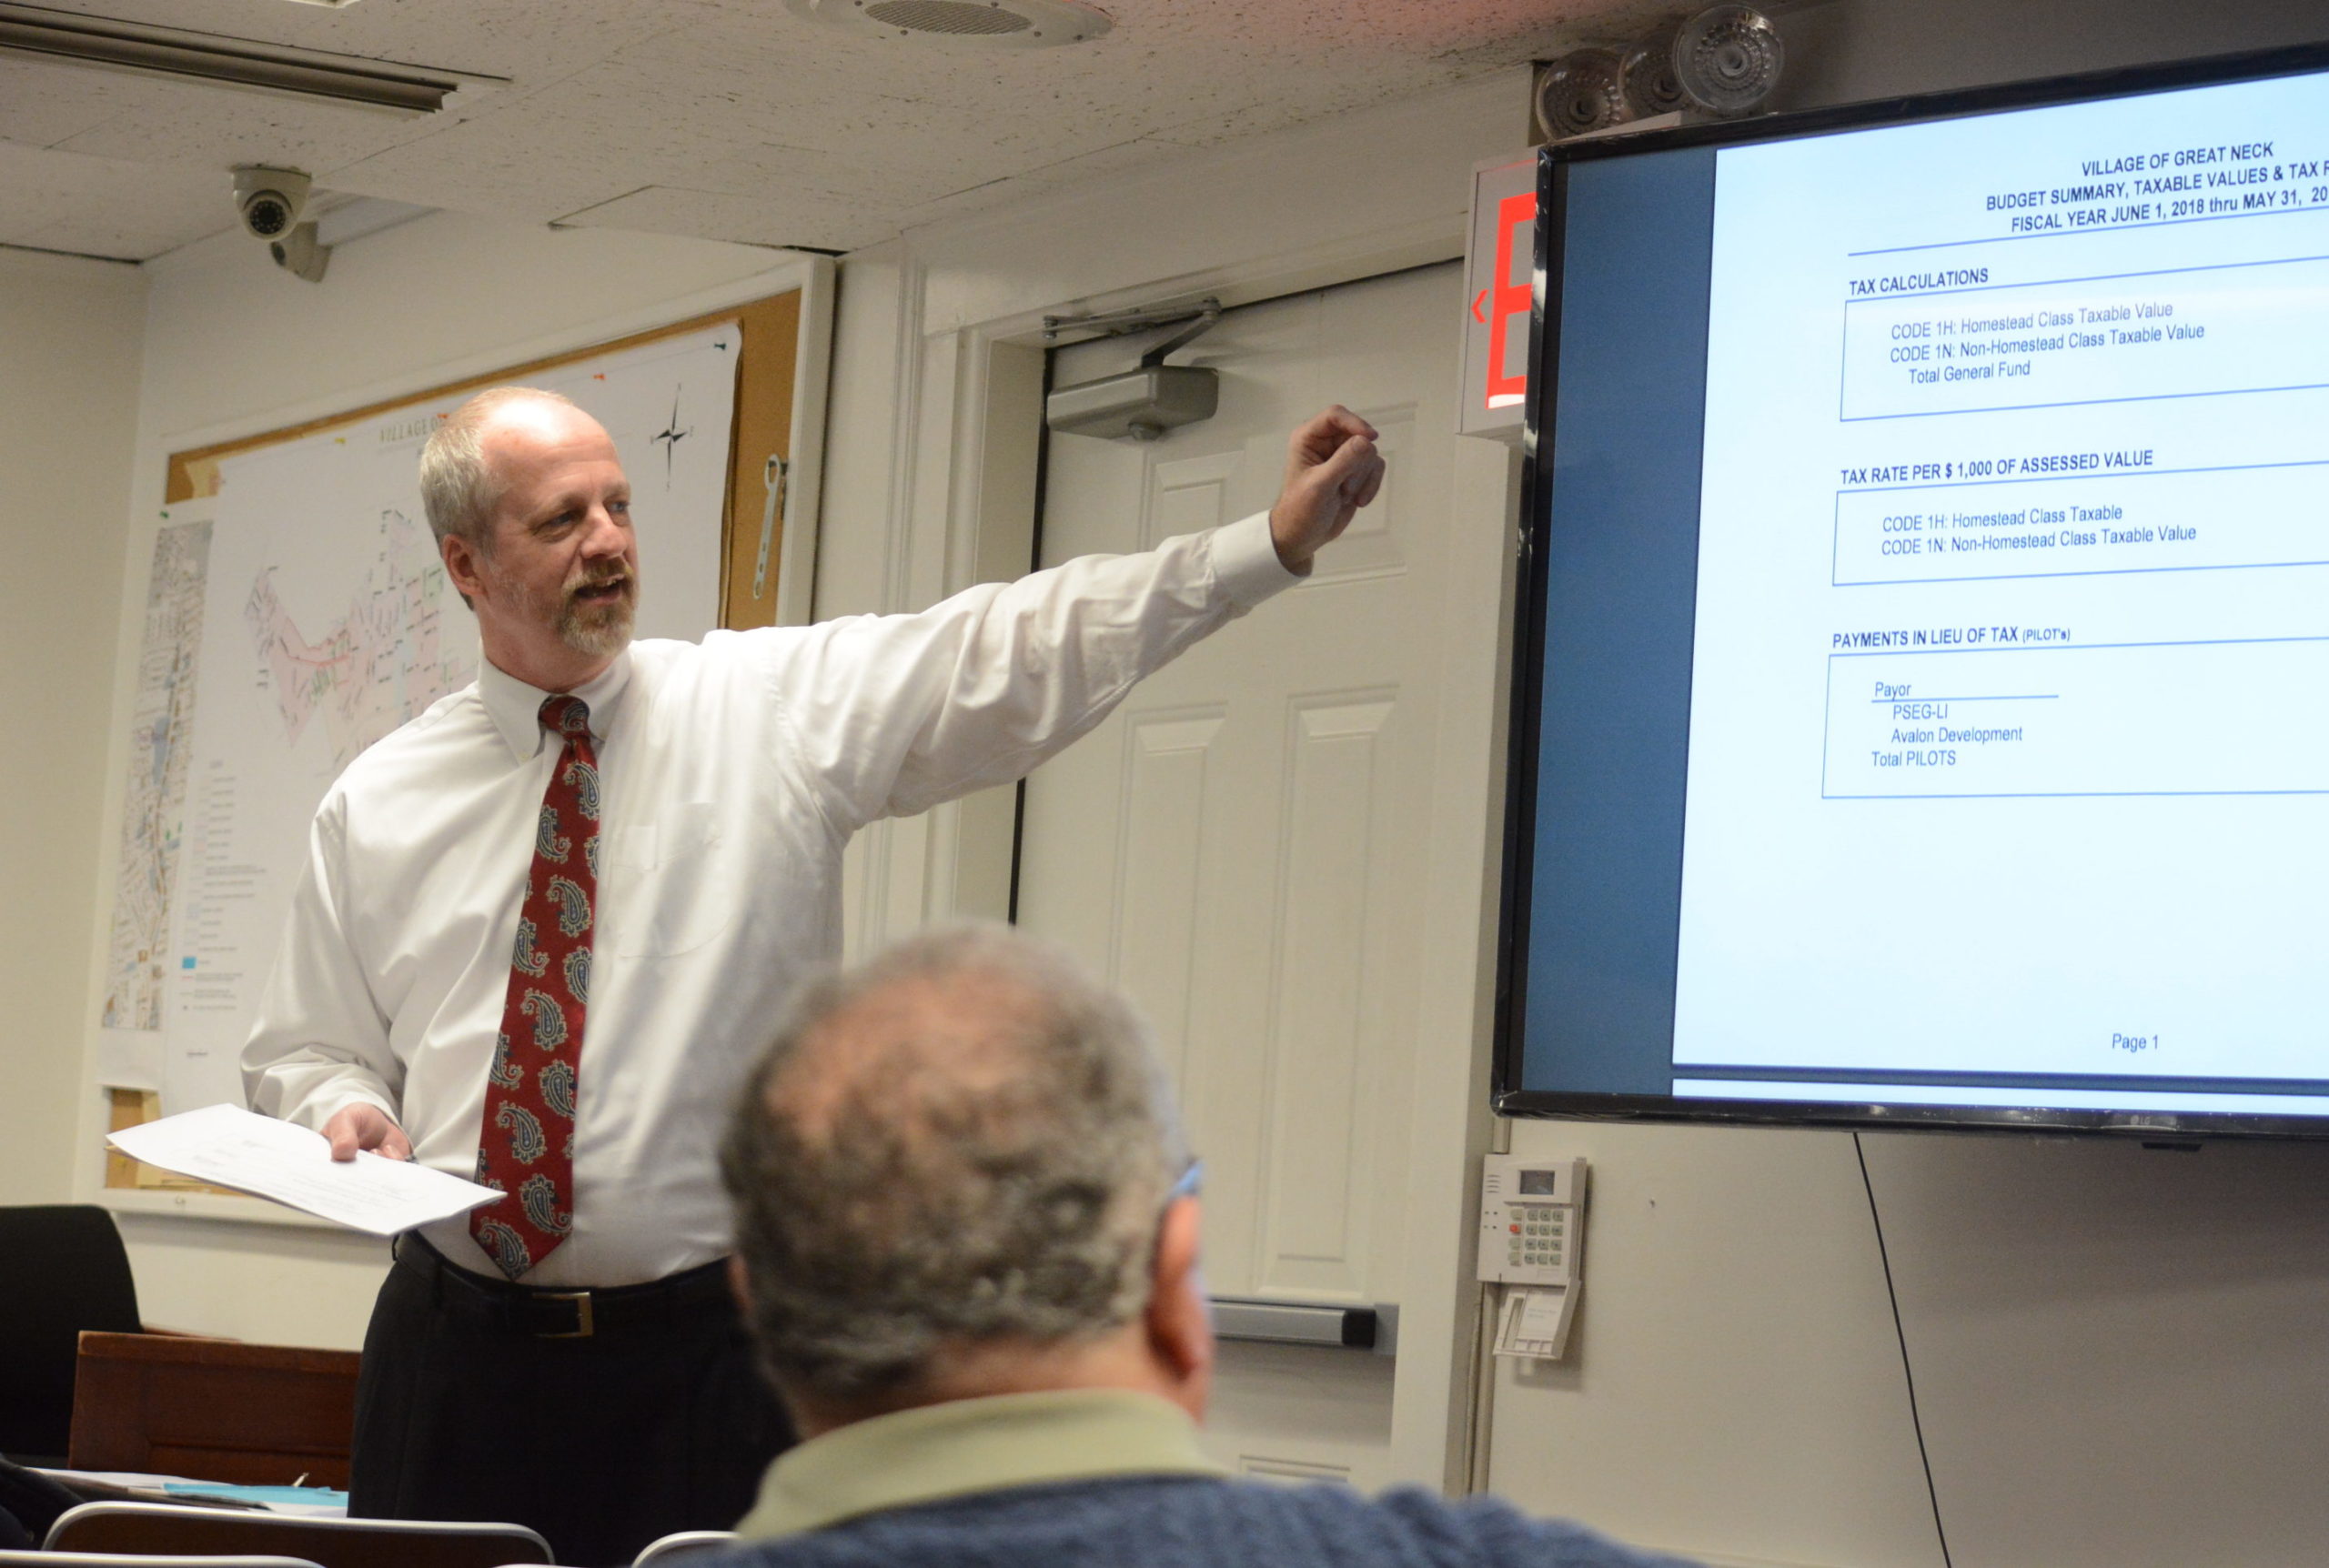 Village Clerk-Treasurer Joe Gill discusses the $9.67 million budget at a Tuesday night board meeting. (Photo by Janelle Clausen)